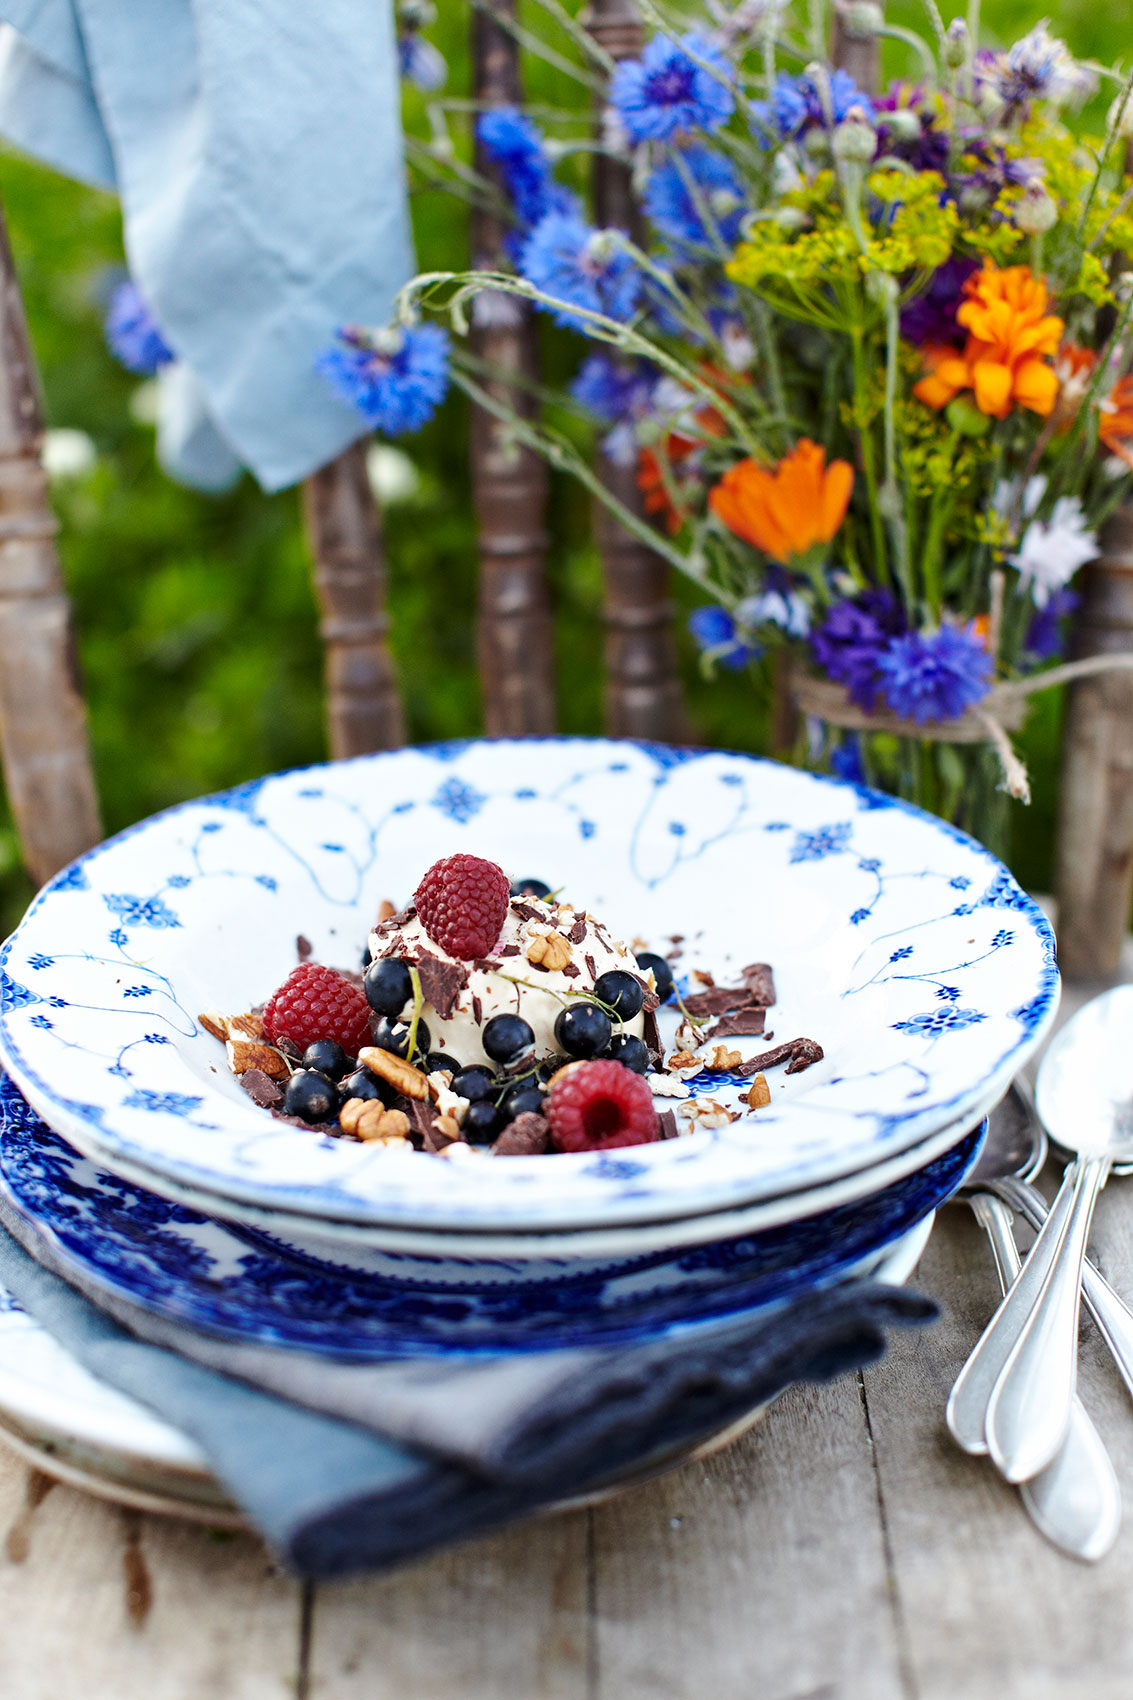 Stedsans in the Woods • Parfait with Berries, Nuts & Chocolate • Lifestyle & Editorial Food Photography